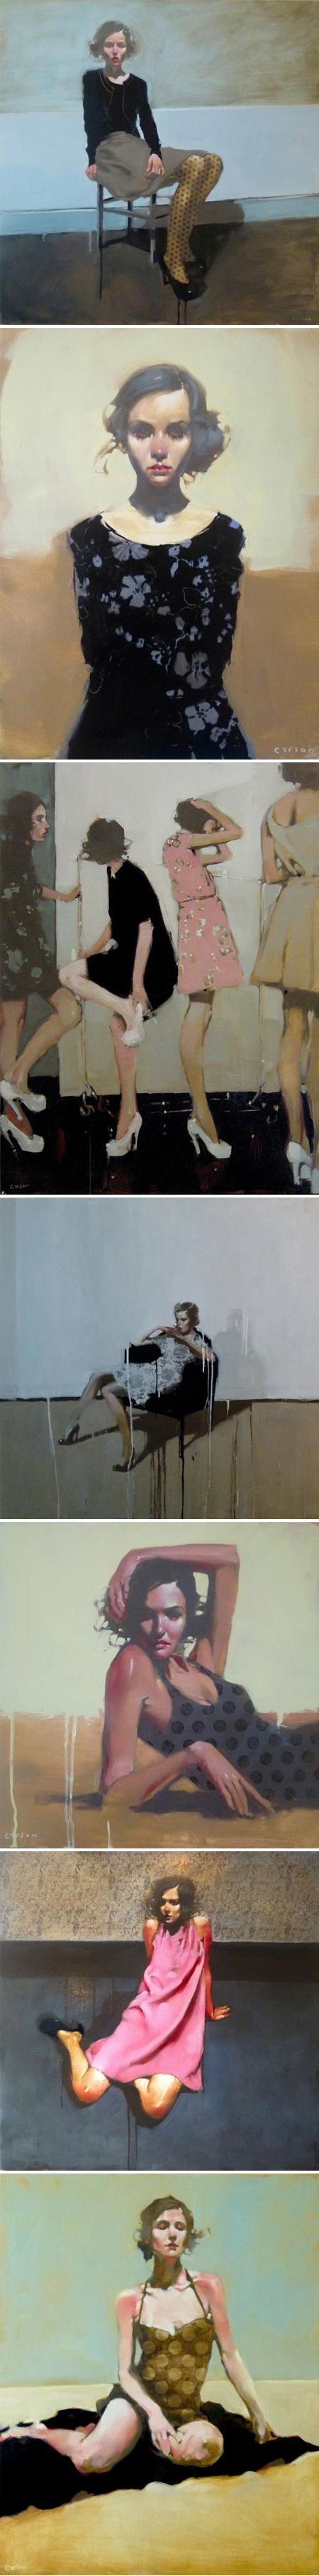 American painter Michael Carson.  Influenced by the paintings of Toulouise Loutr